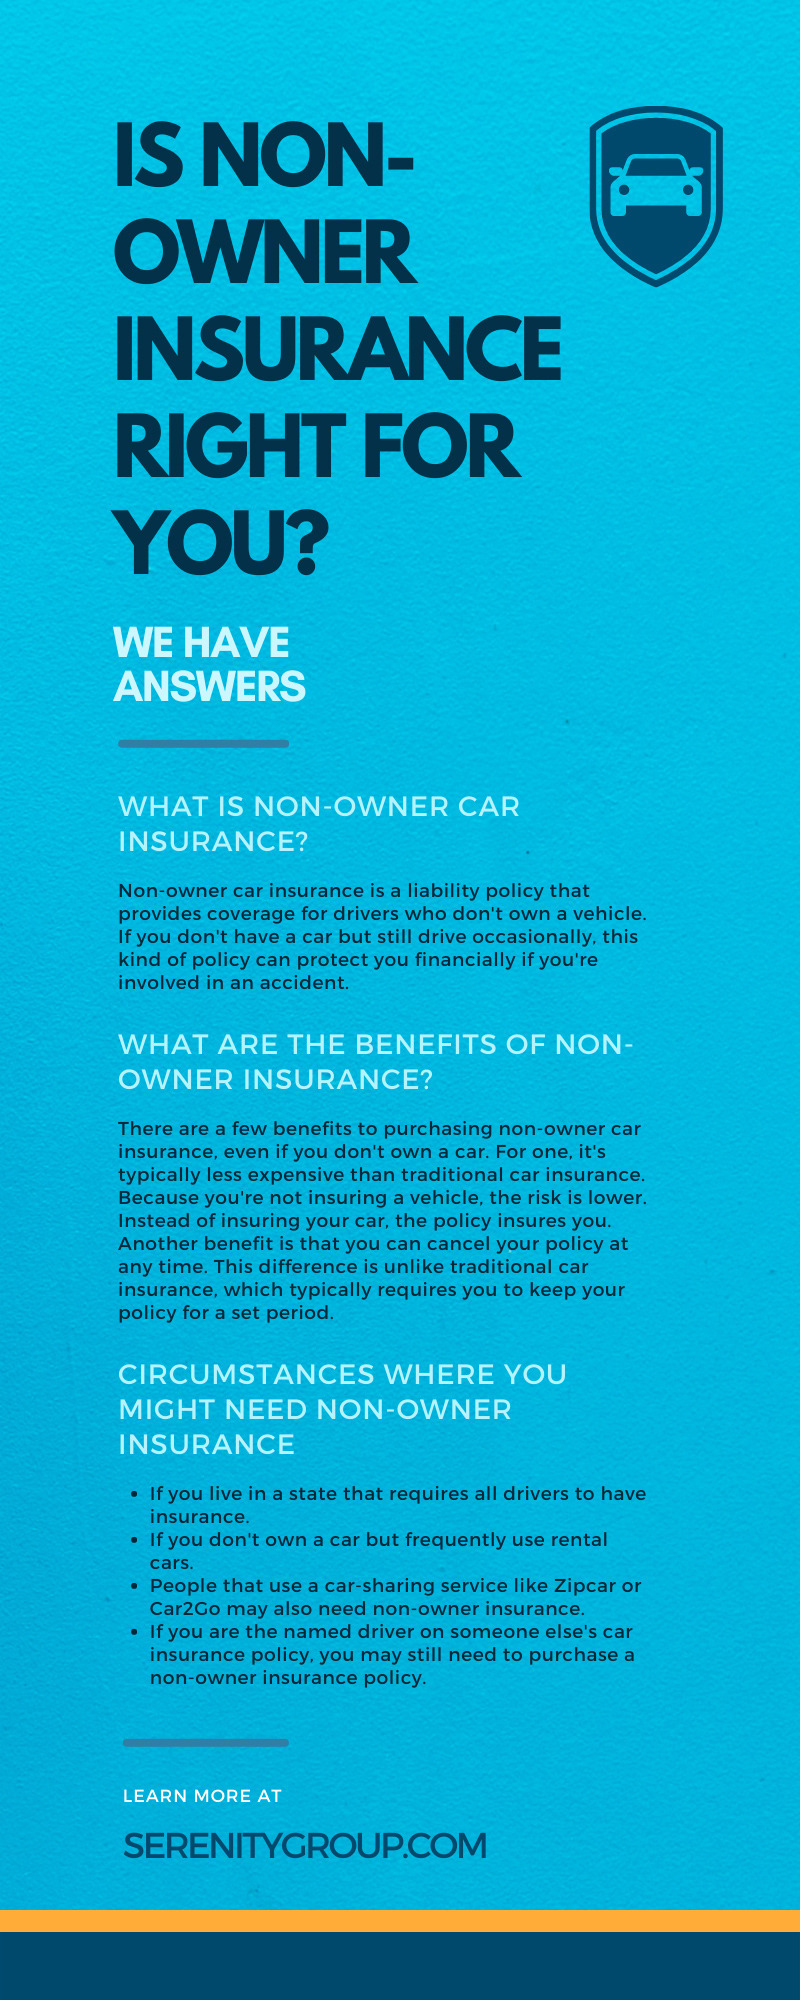 Is Non-Owner Insurance Right For You? We Have Answers